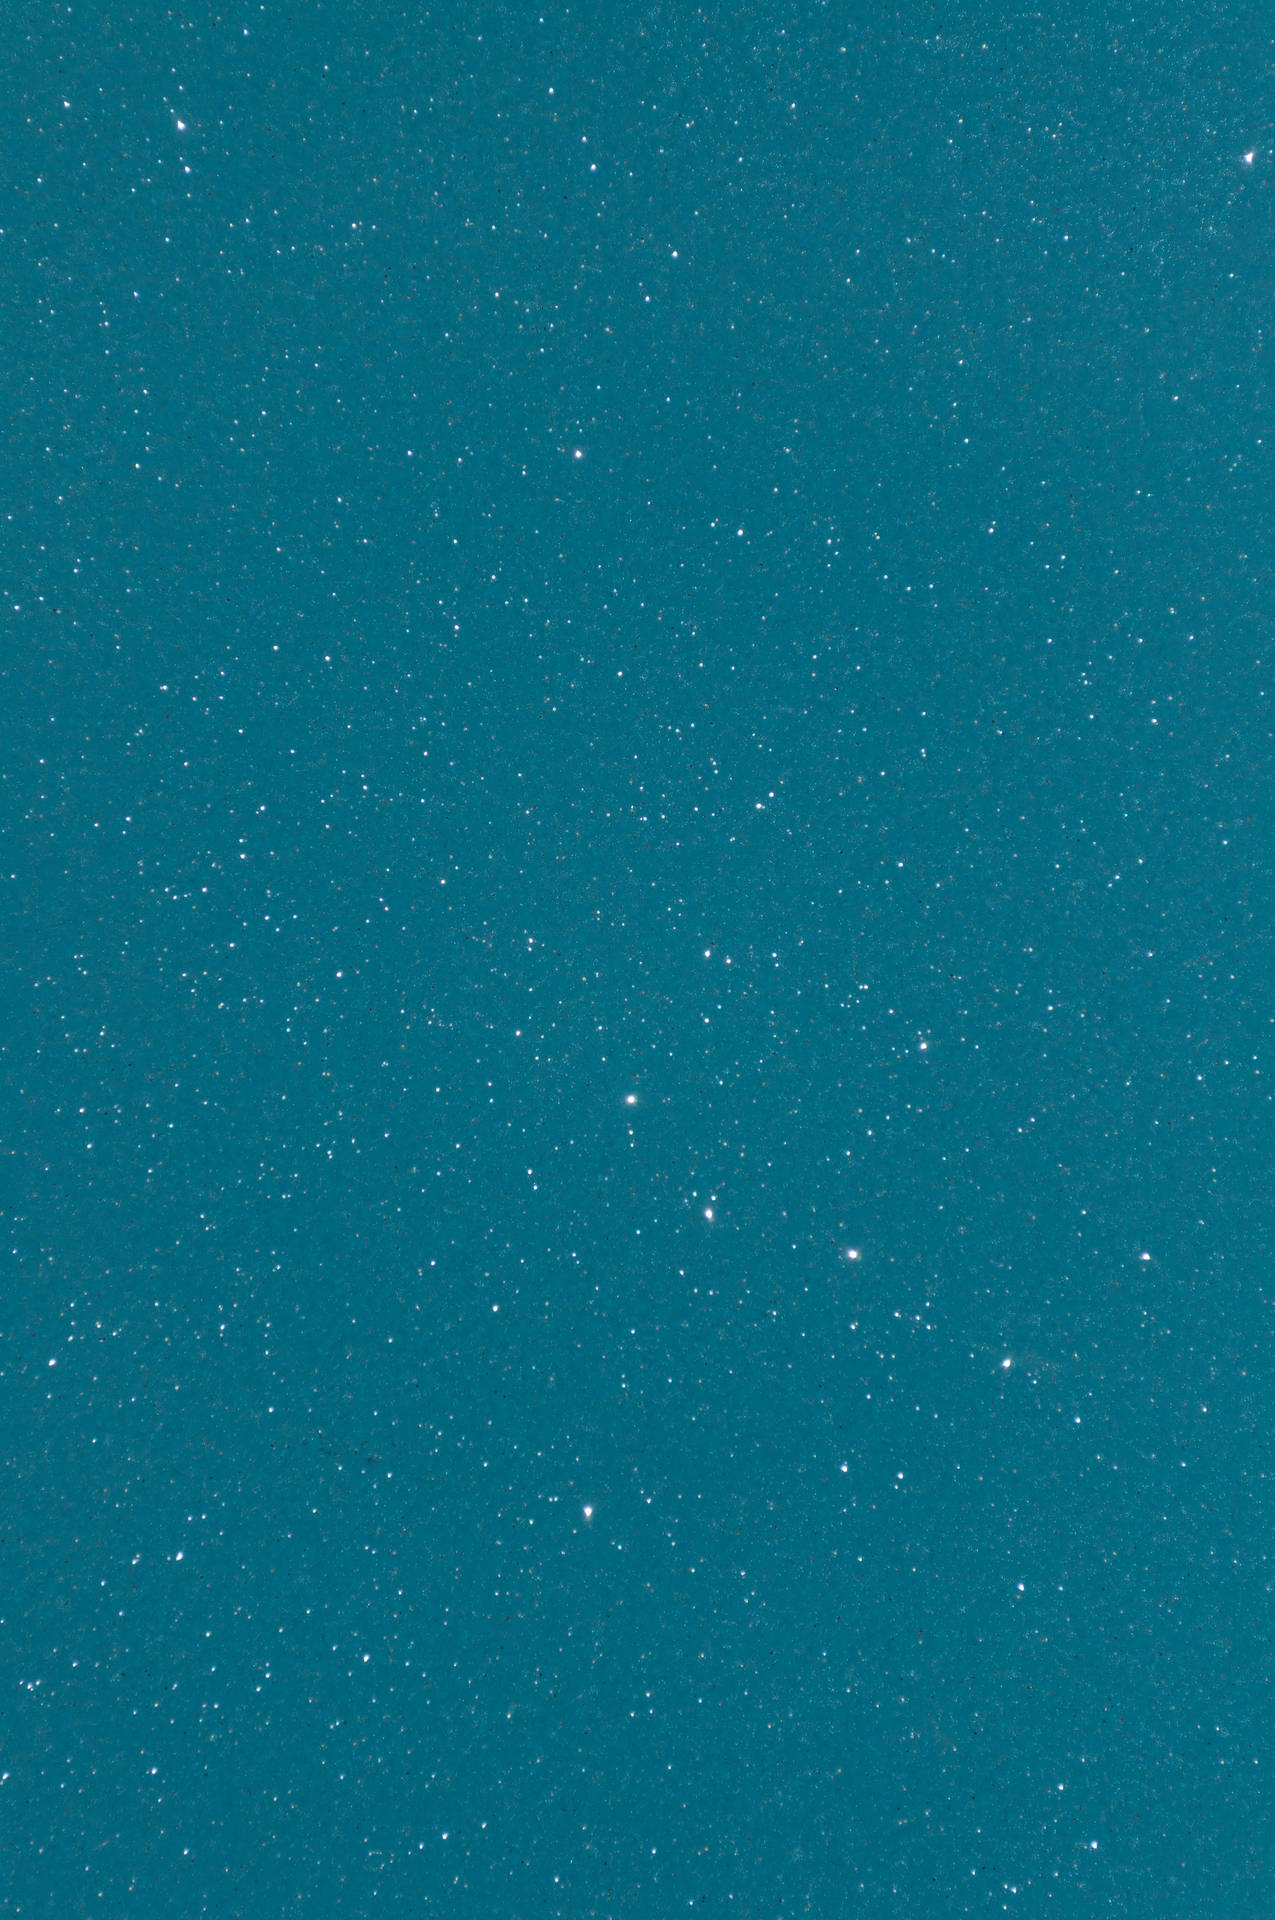 Teal Starry Night